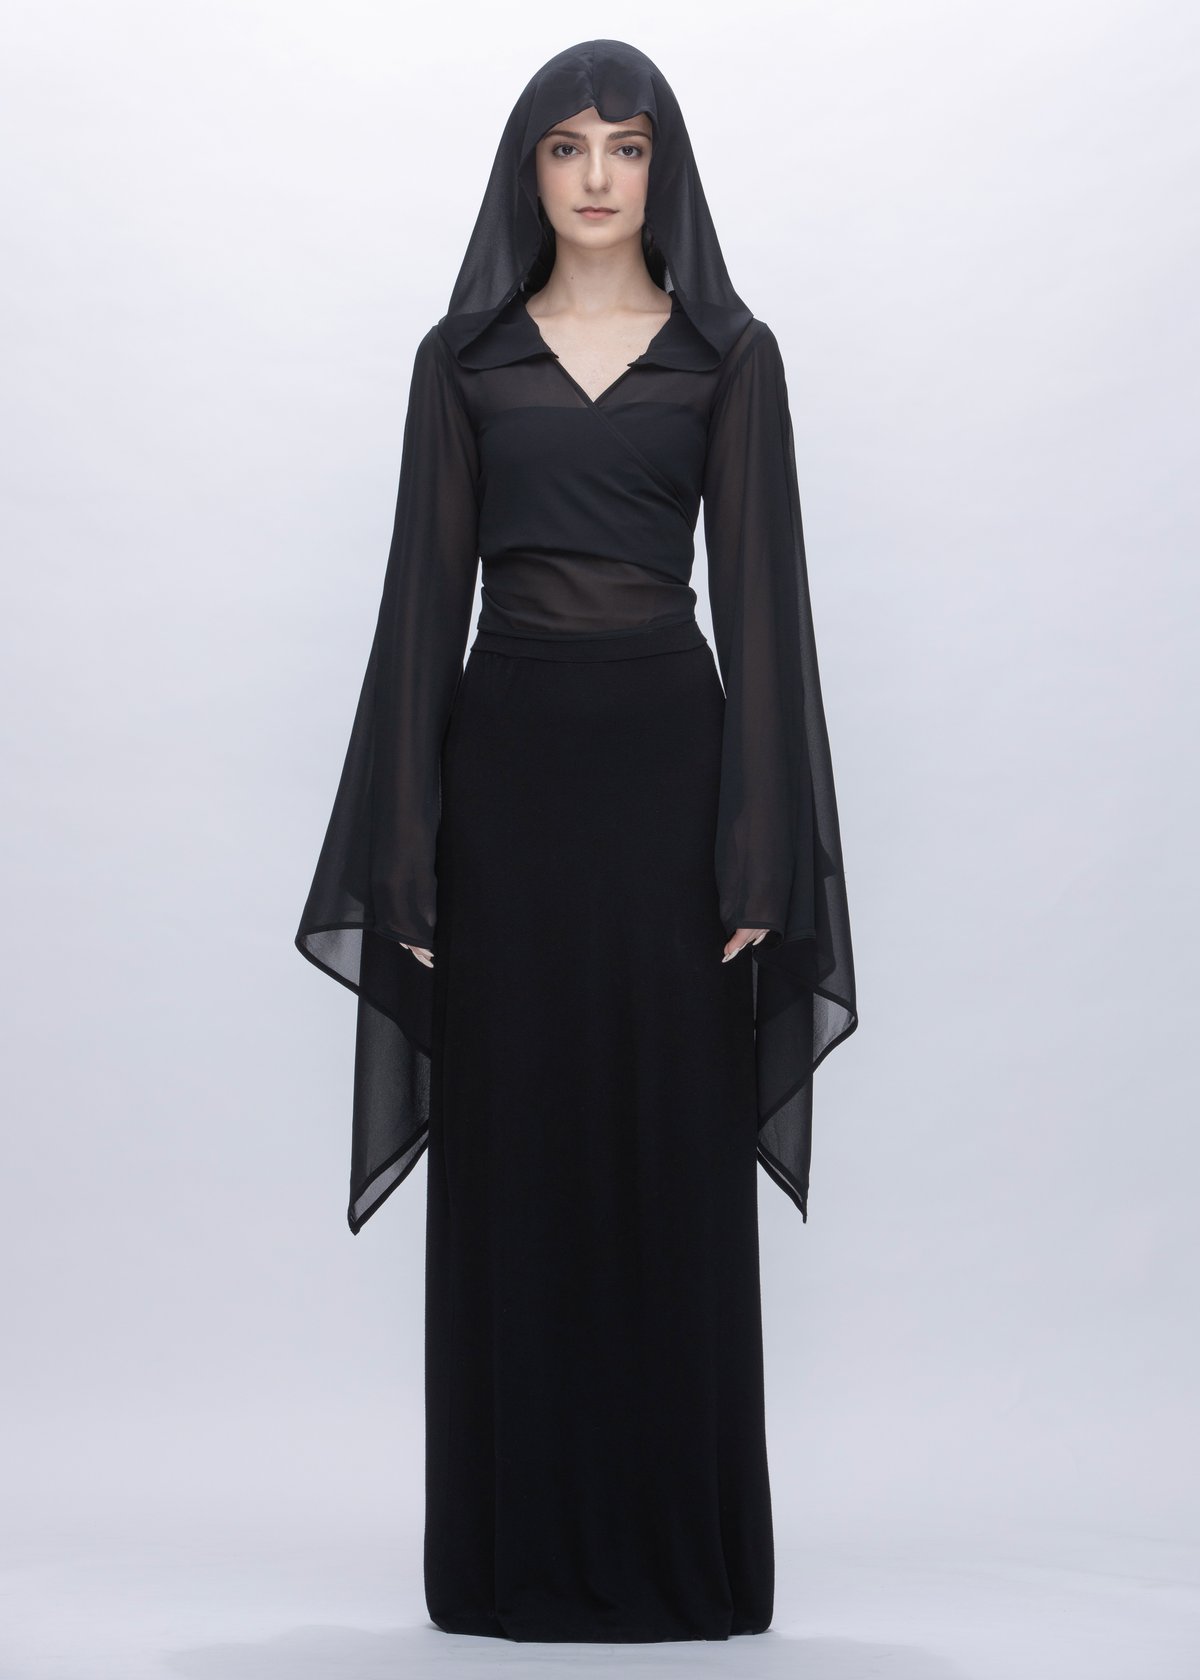 Image of Cape Sleeves Wrap Cropped Sheer Top With Hooded